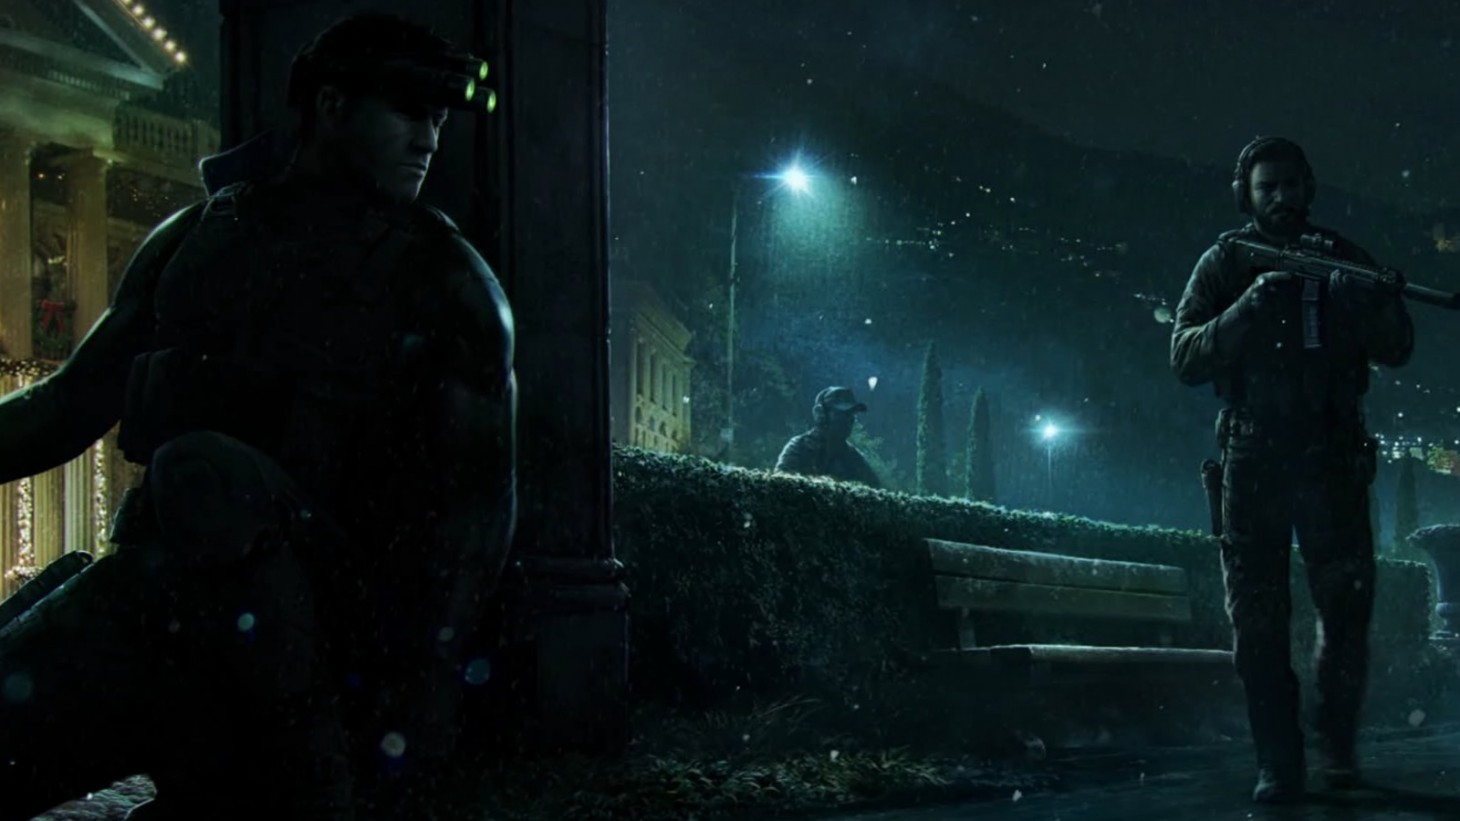 Ubisoft has officially confirmed Splinter Cell Remake, will be